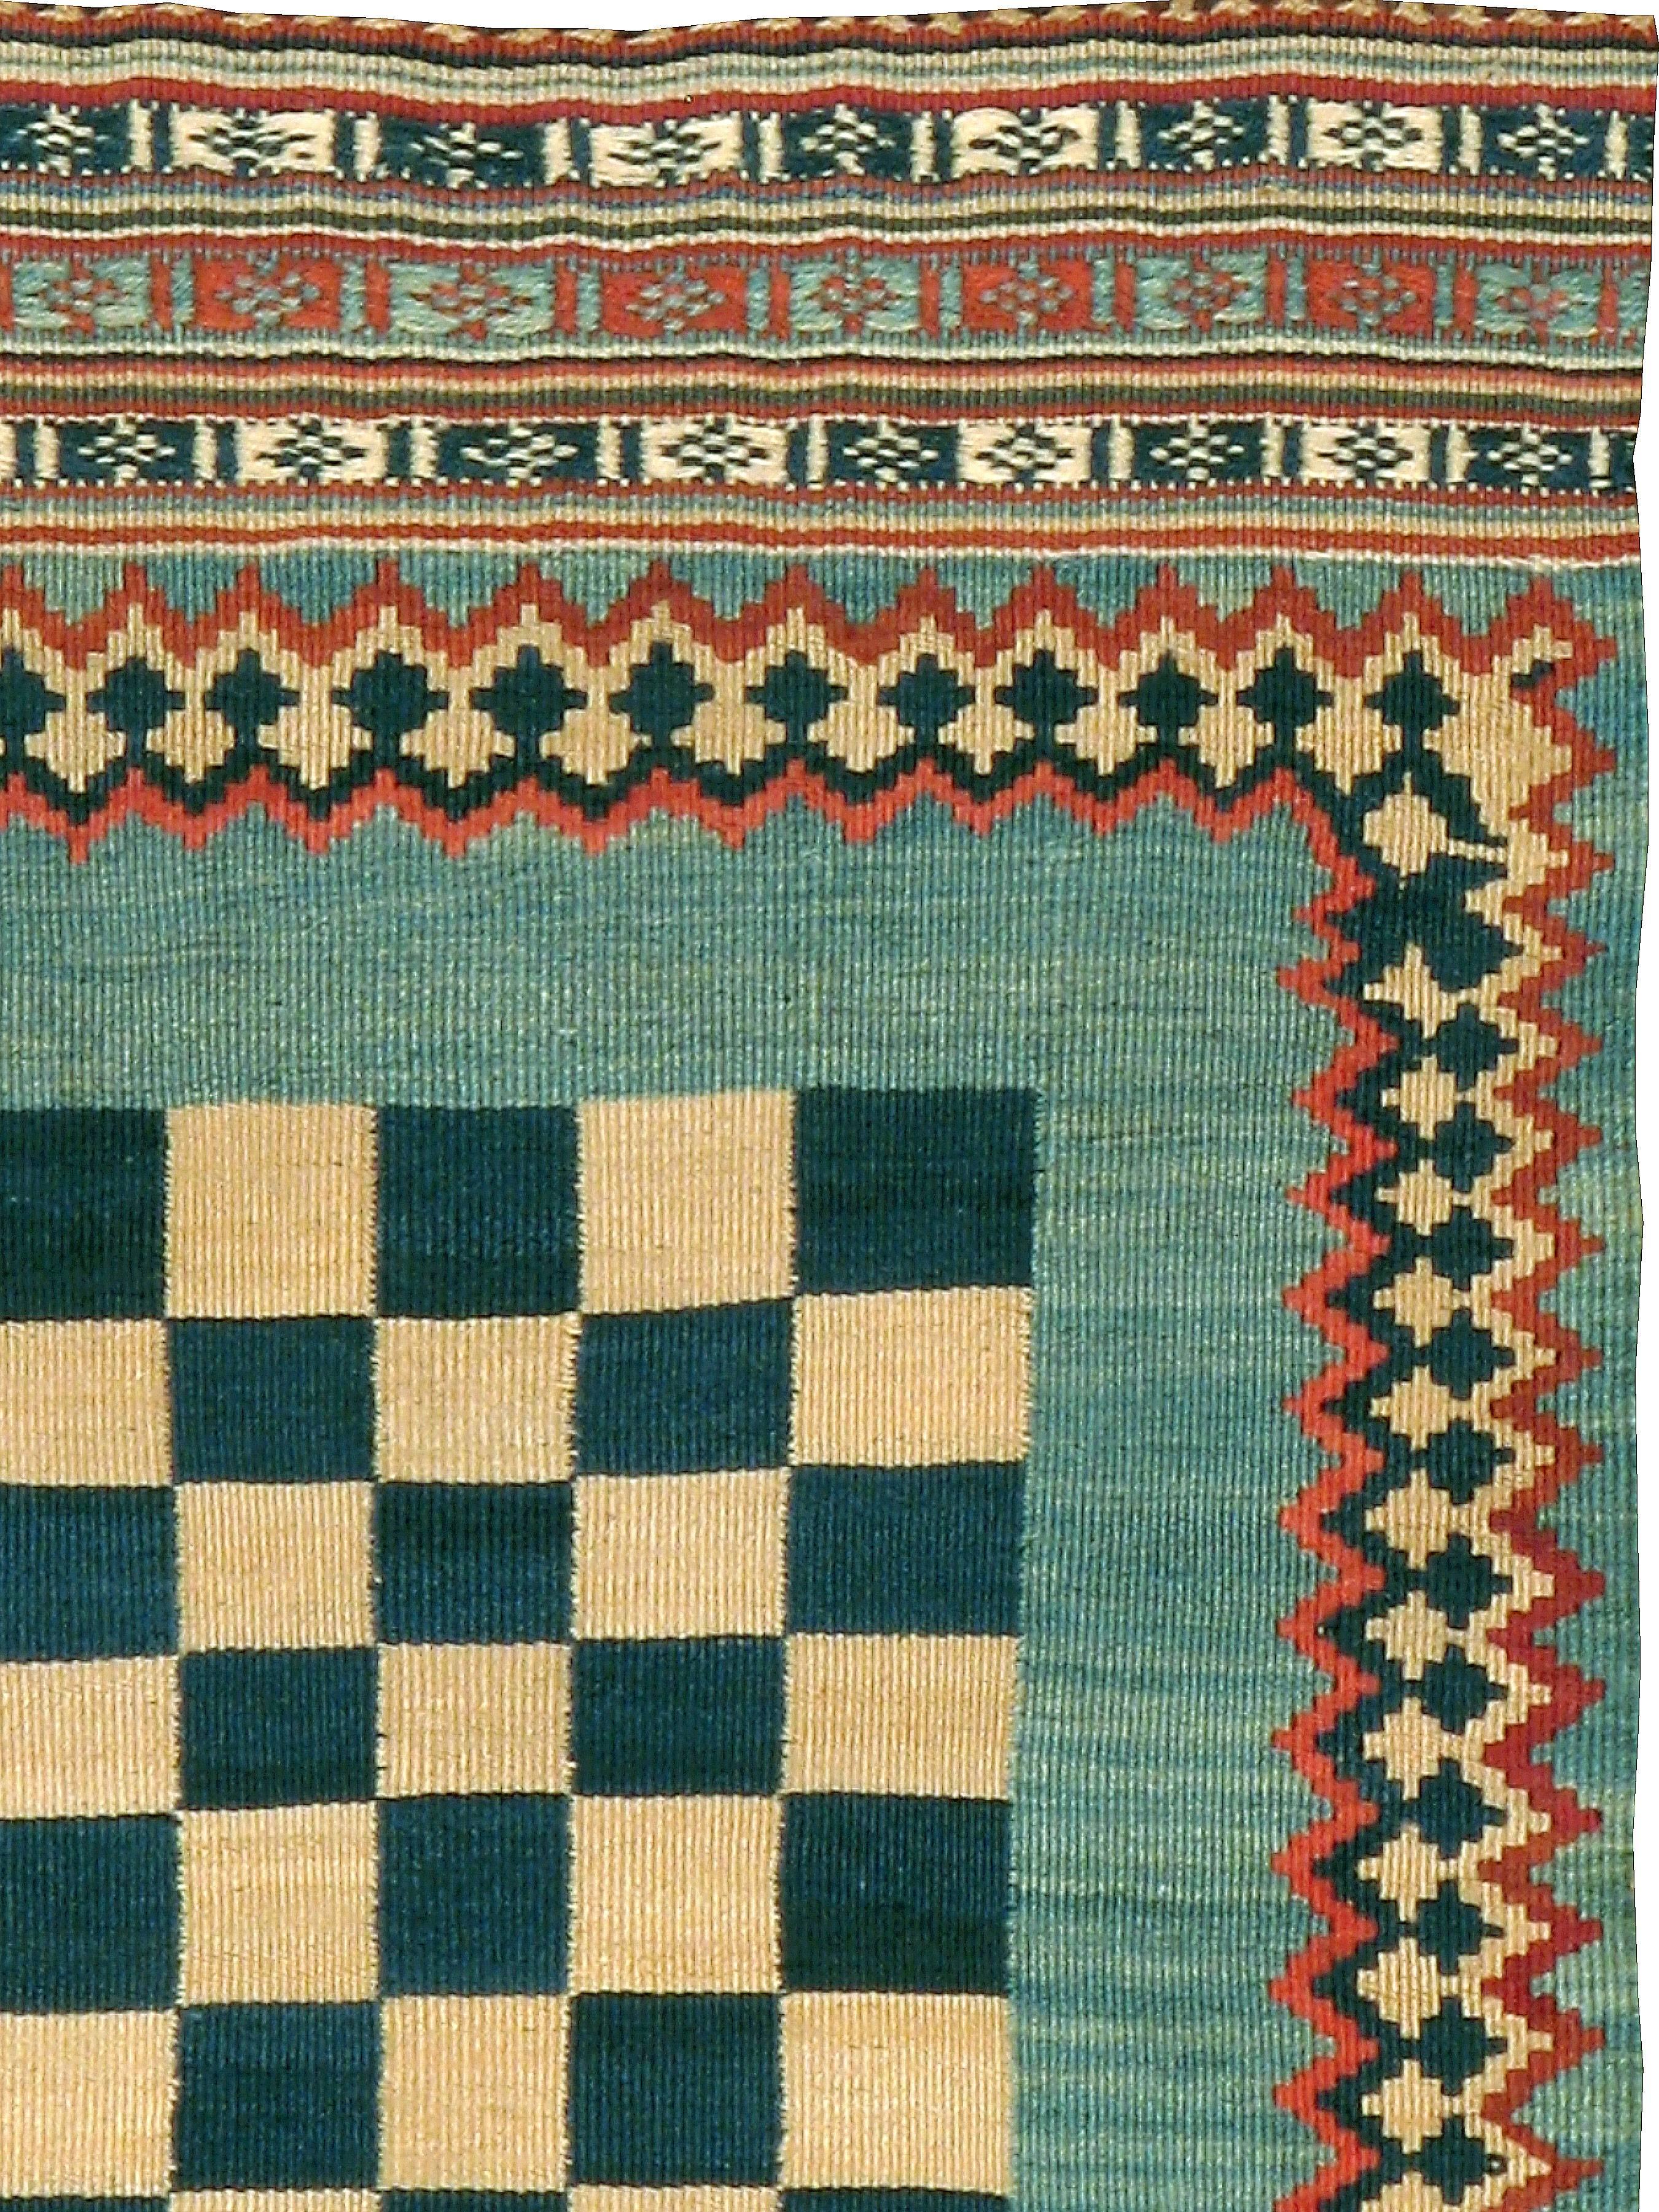 A vintage Persian flat-woven Kilim carpet from the mid-20th century.